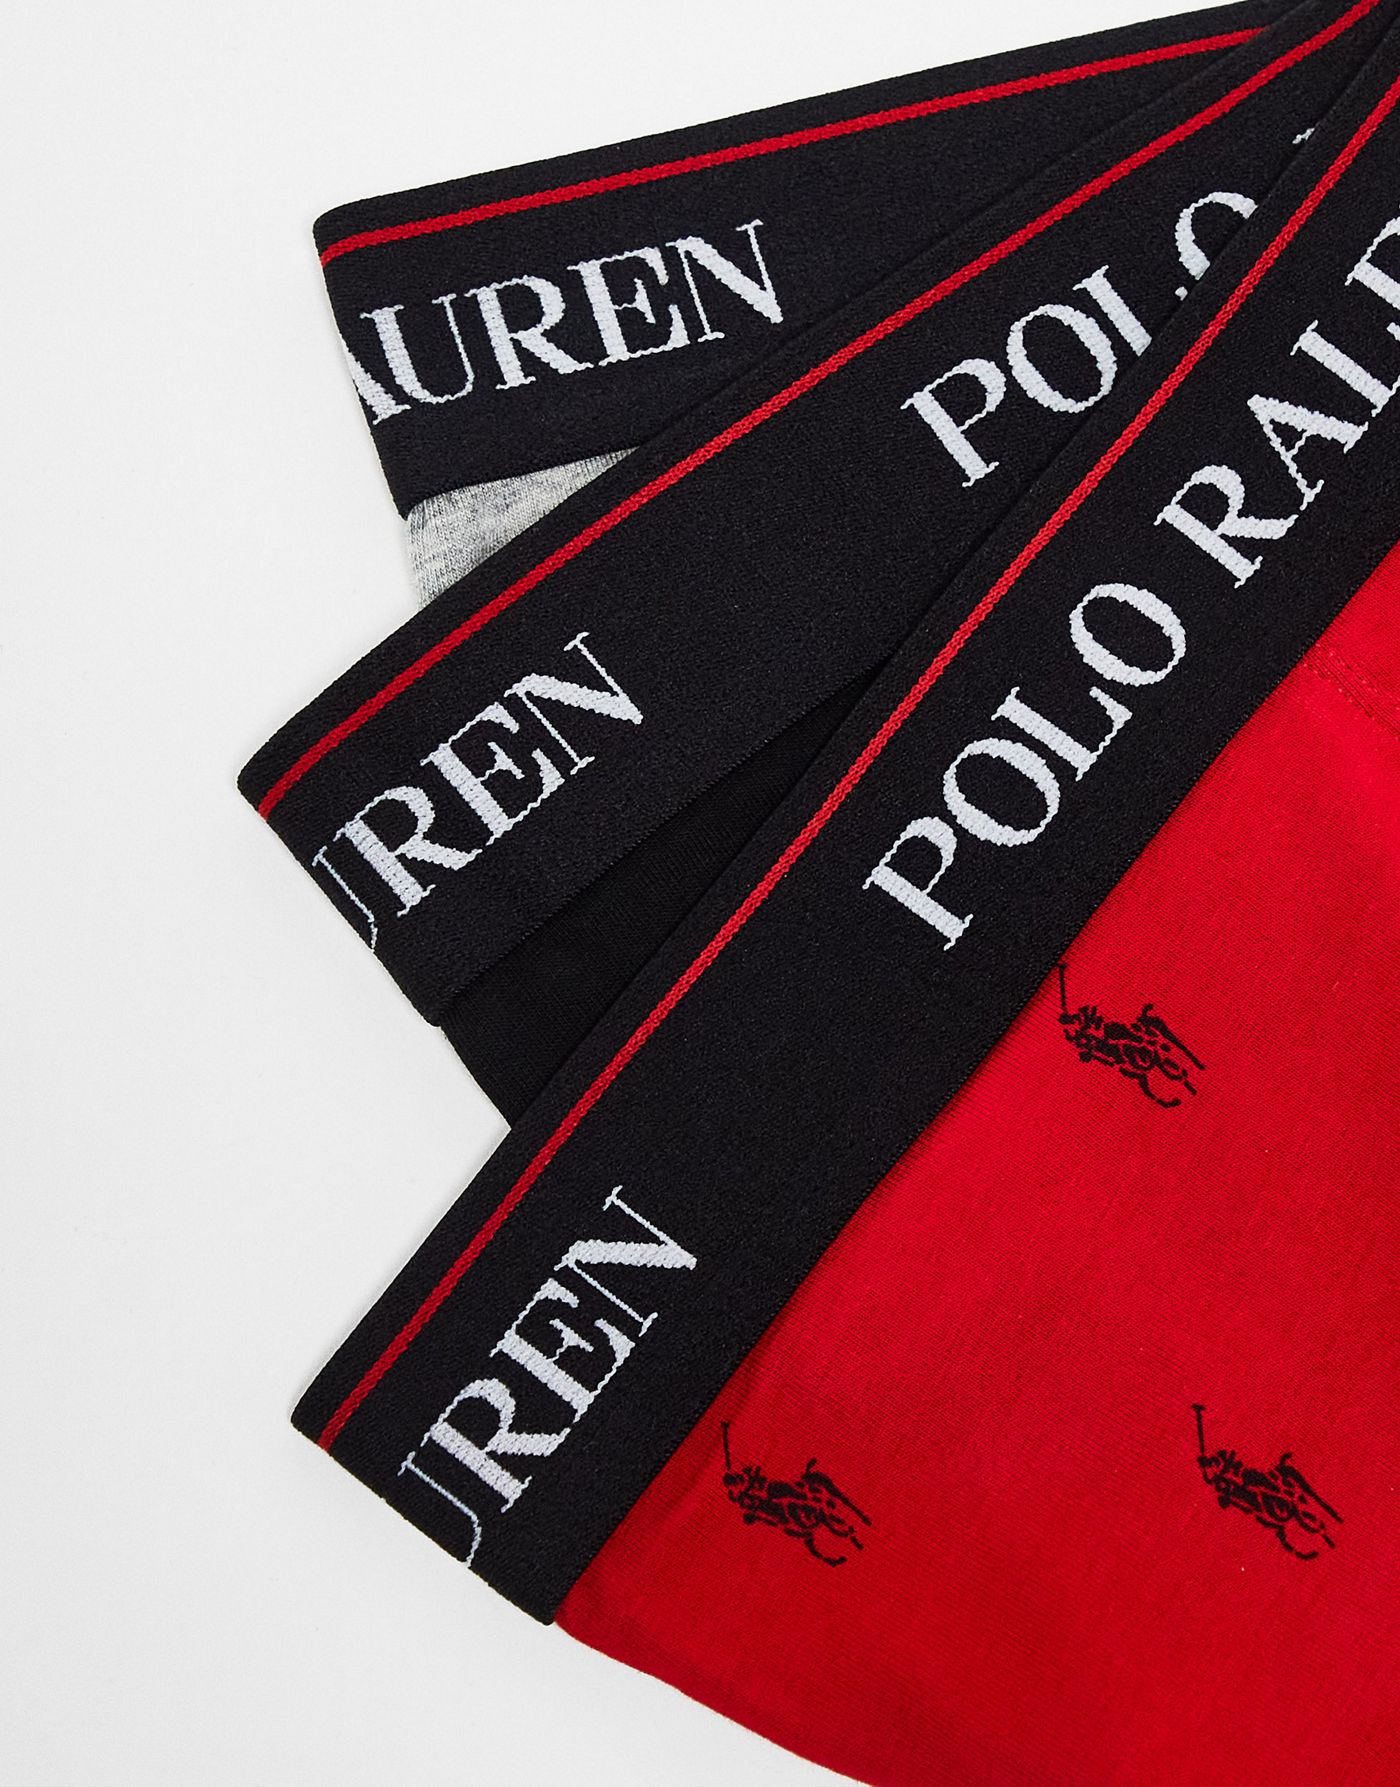 Polo Ralph Lauren 3 pack trunks grey red black with all over pony logo